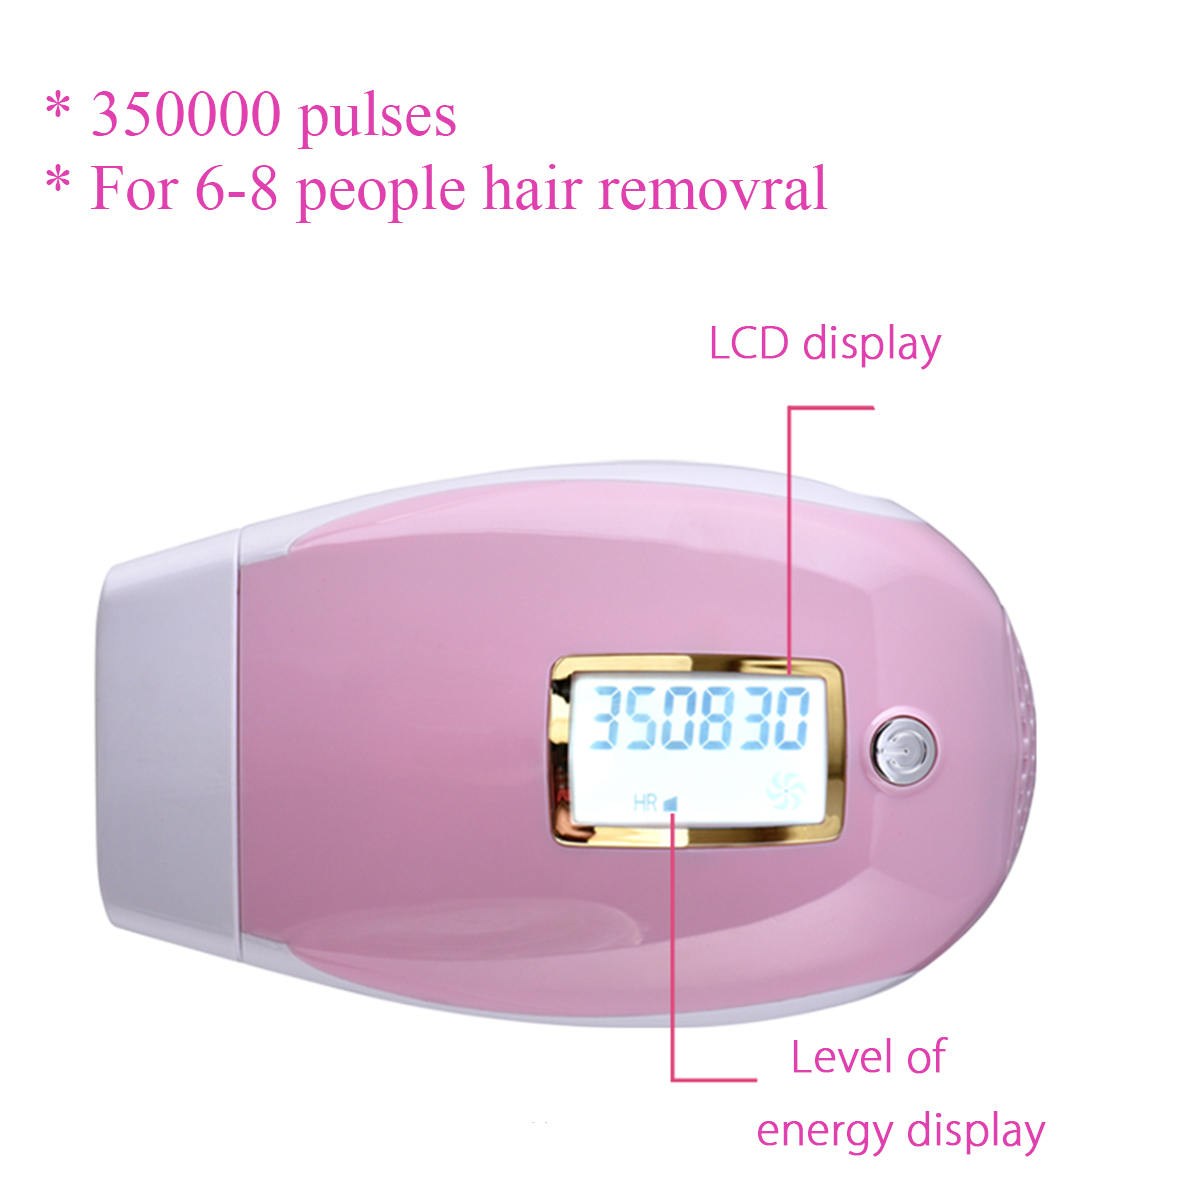 3-In-1-Permanent-IPL-Hair-Removal-Display-Hair-Removal-System-Hair-Reduction-Epilator-1414772